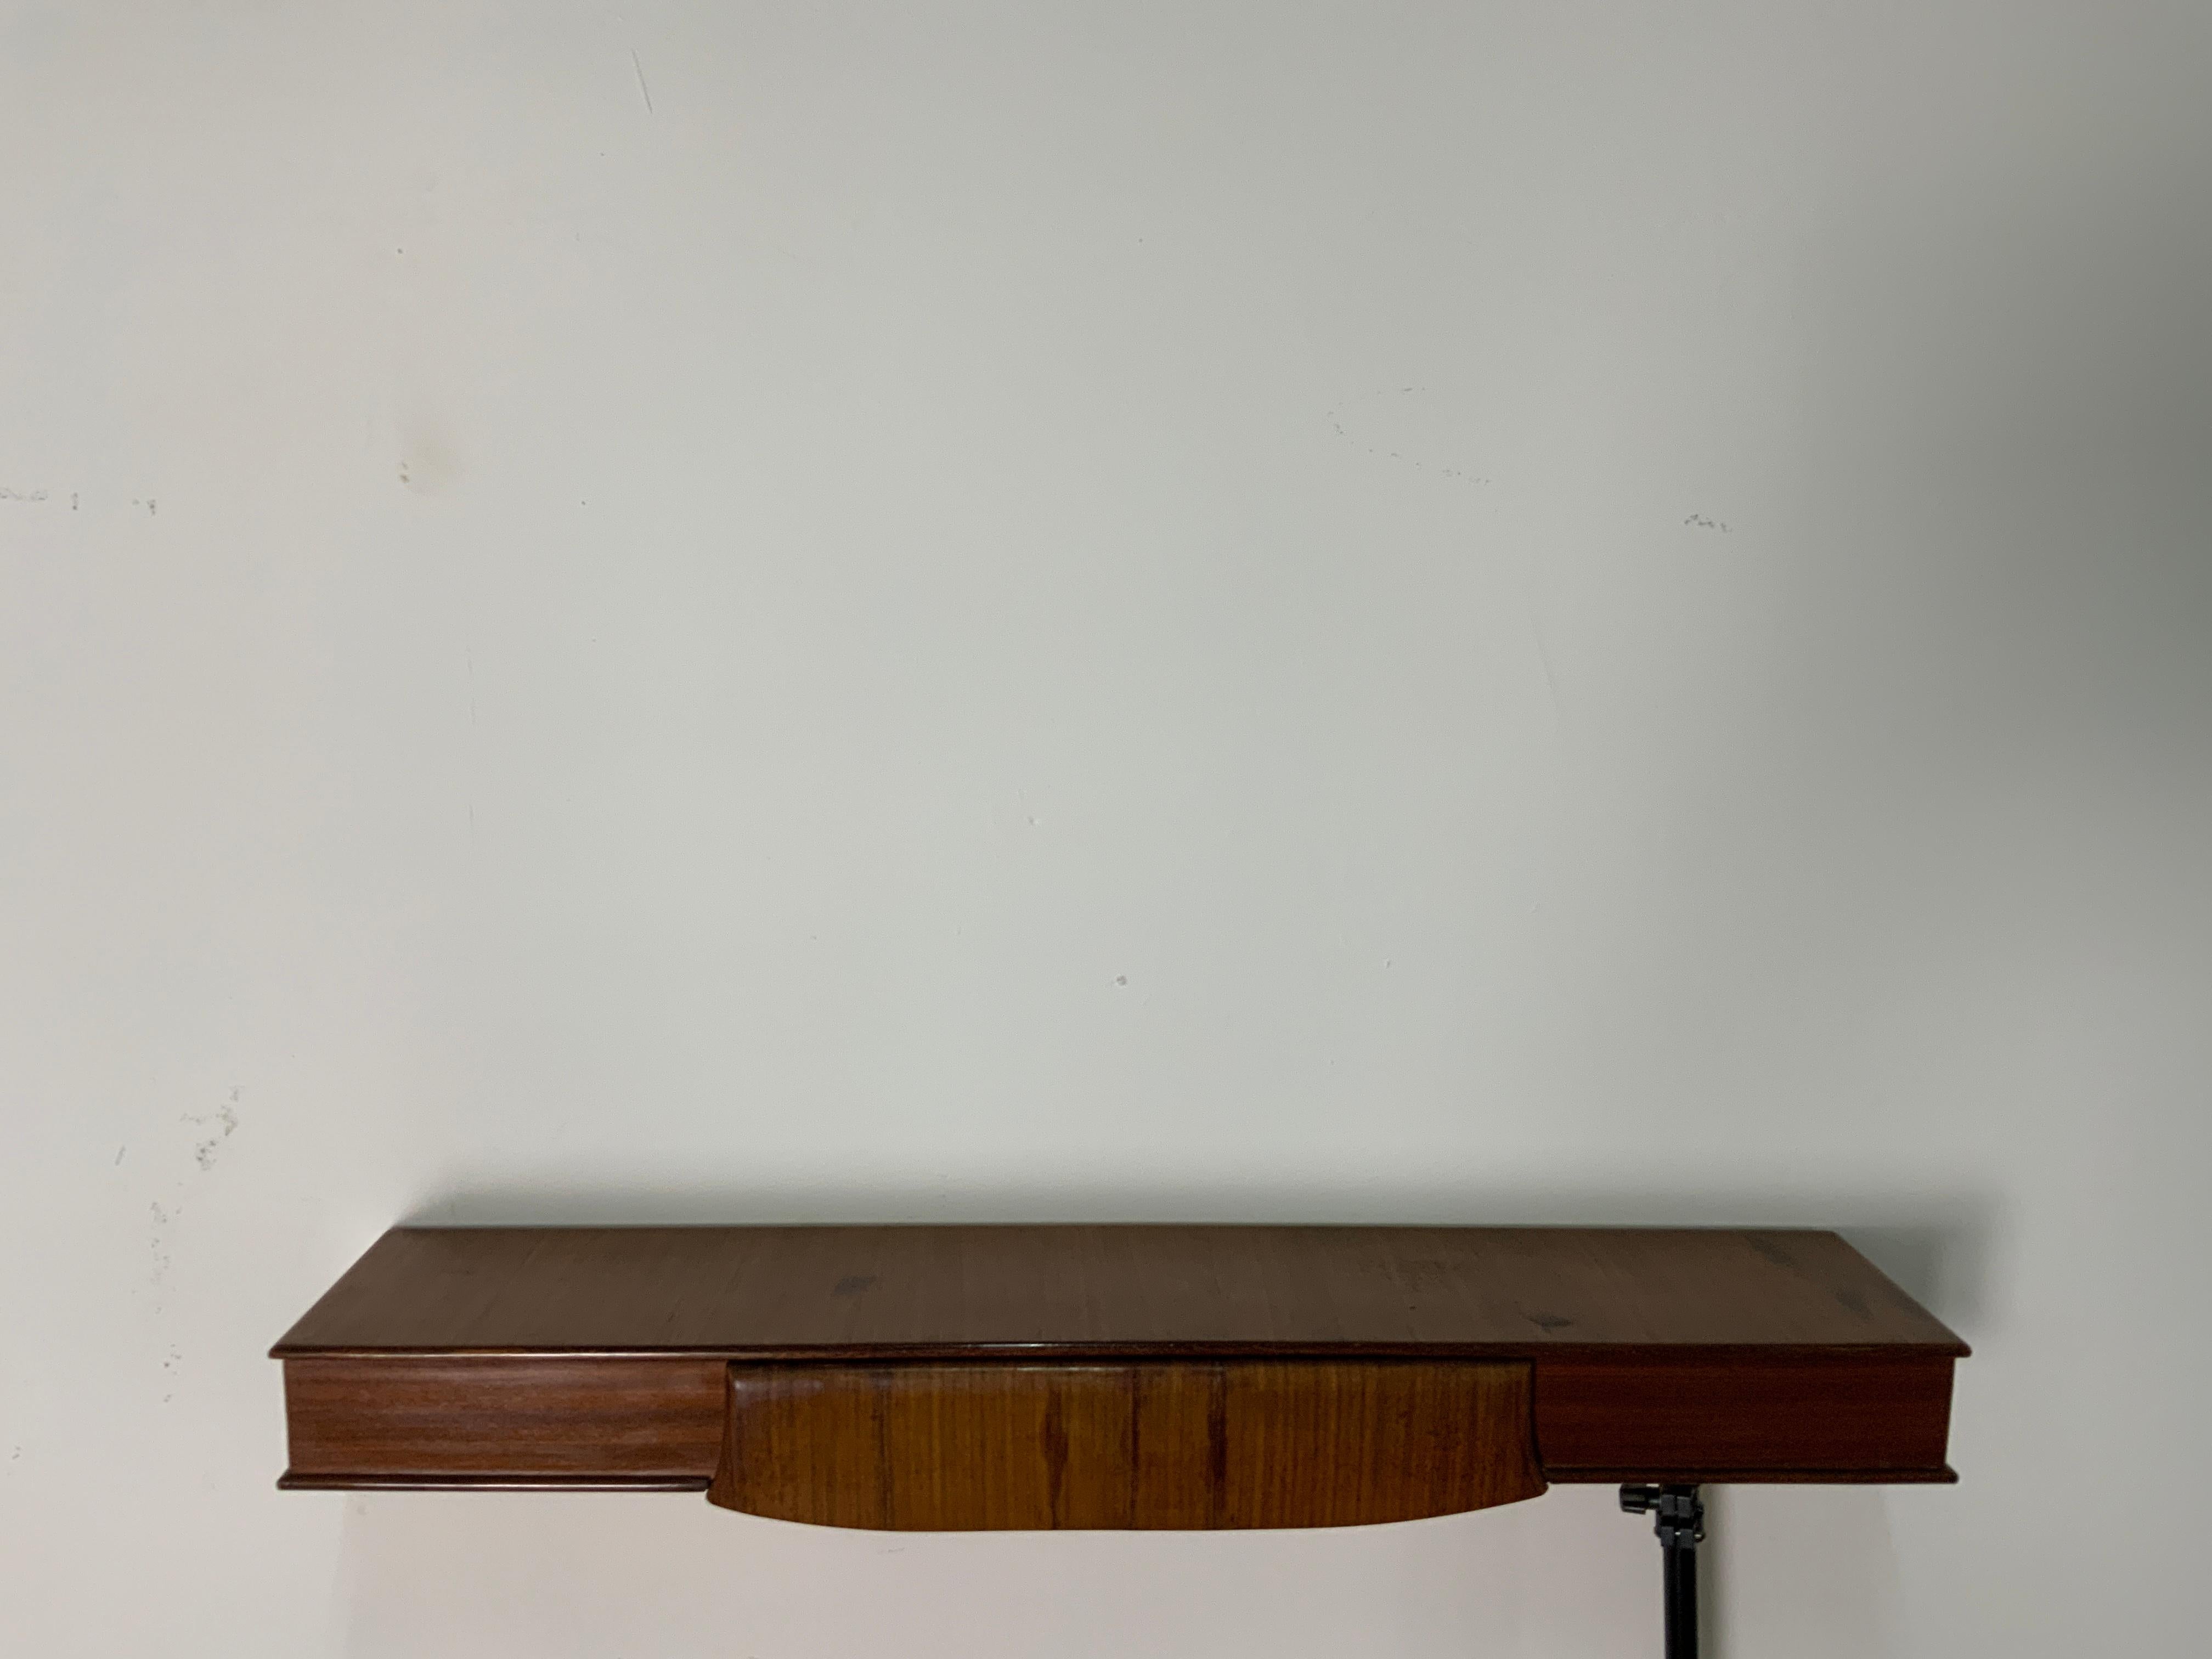 Hanging console with drawer from the 1960s attributed to the Italian designer Osvaldo Borsani.